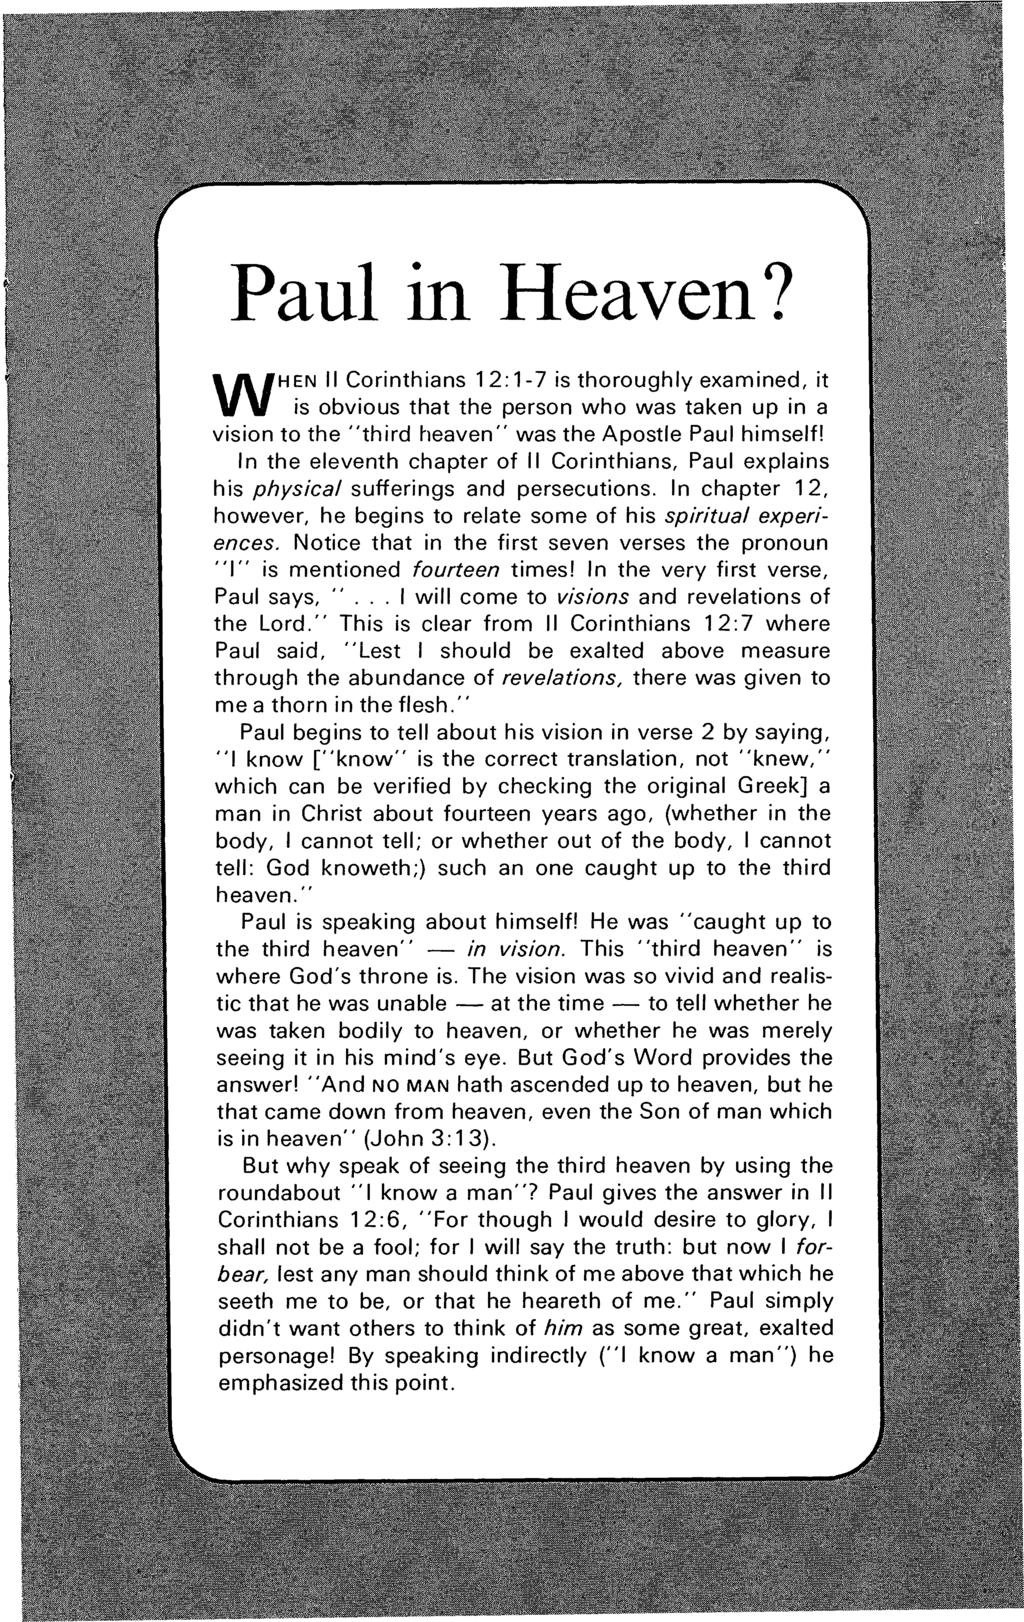 Paul in Heaven? W H EN II Corinthians 12:1-7 is thoroughly examined, it is obvious that the person who was taken up in a vision to the "third heaven" was the Apostle Paul himself!